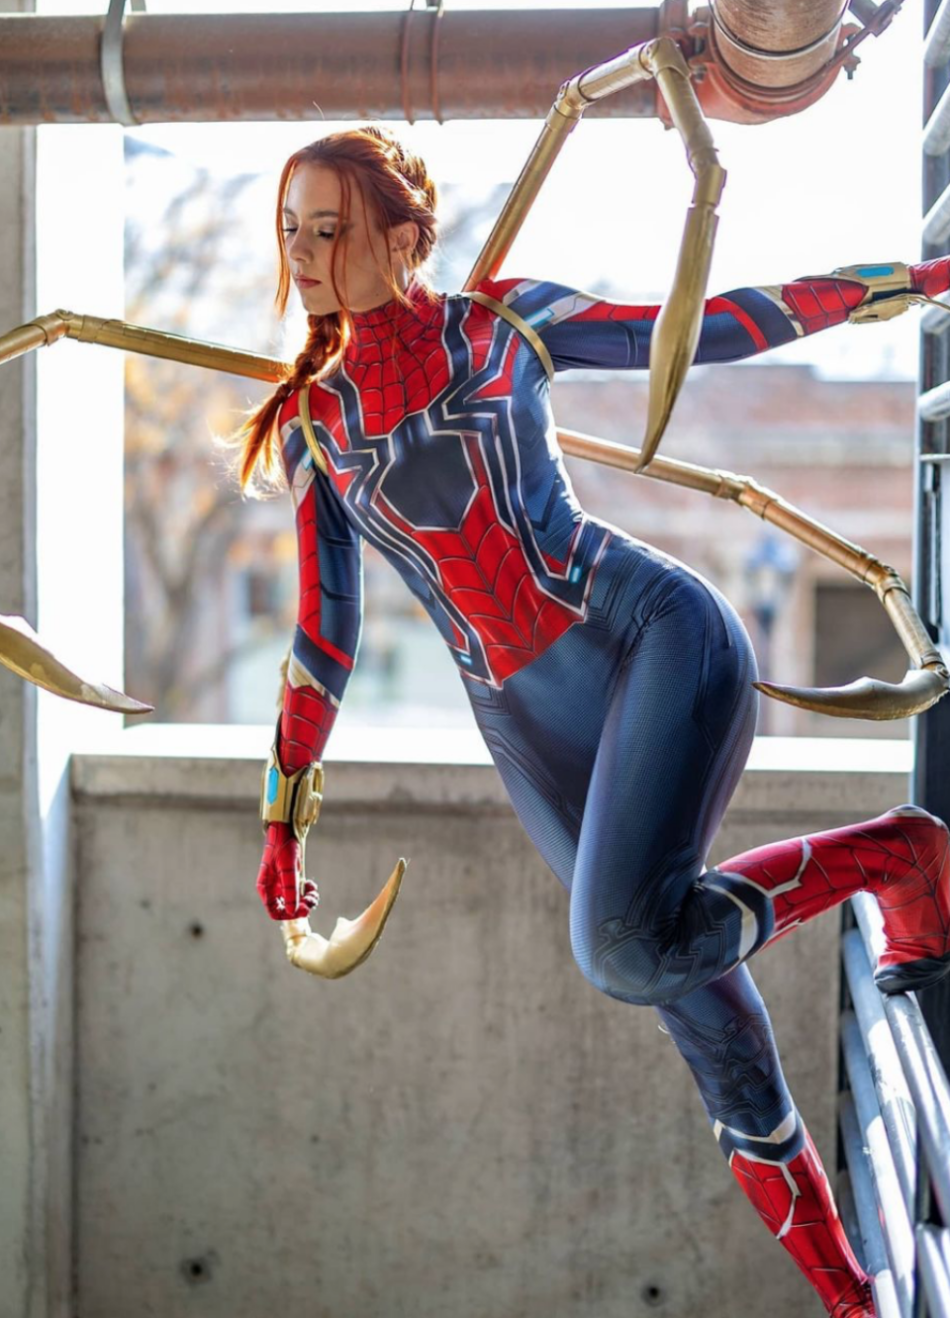 Sexy Red Hot Cosplay Girls Spiderman Women Best Photo Compilation 2021 (89 HQ Photos) 437